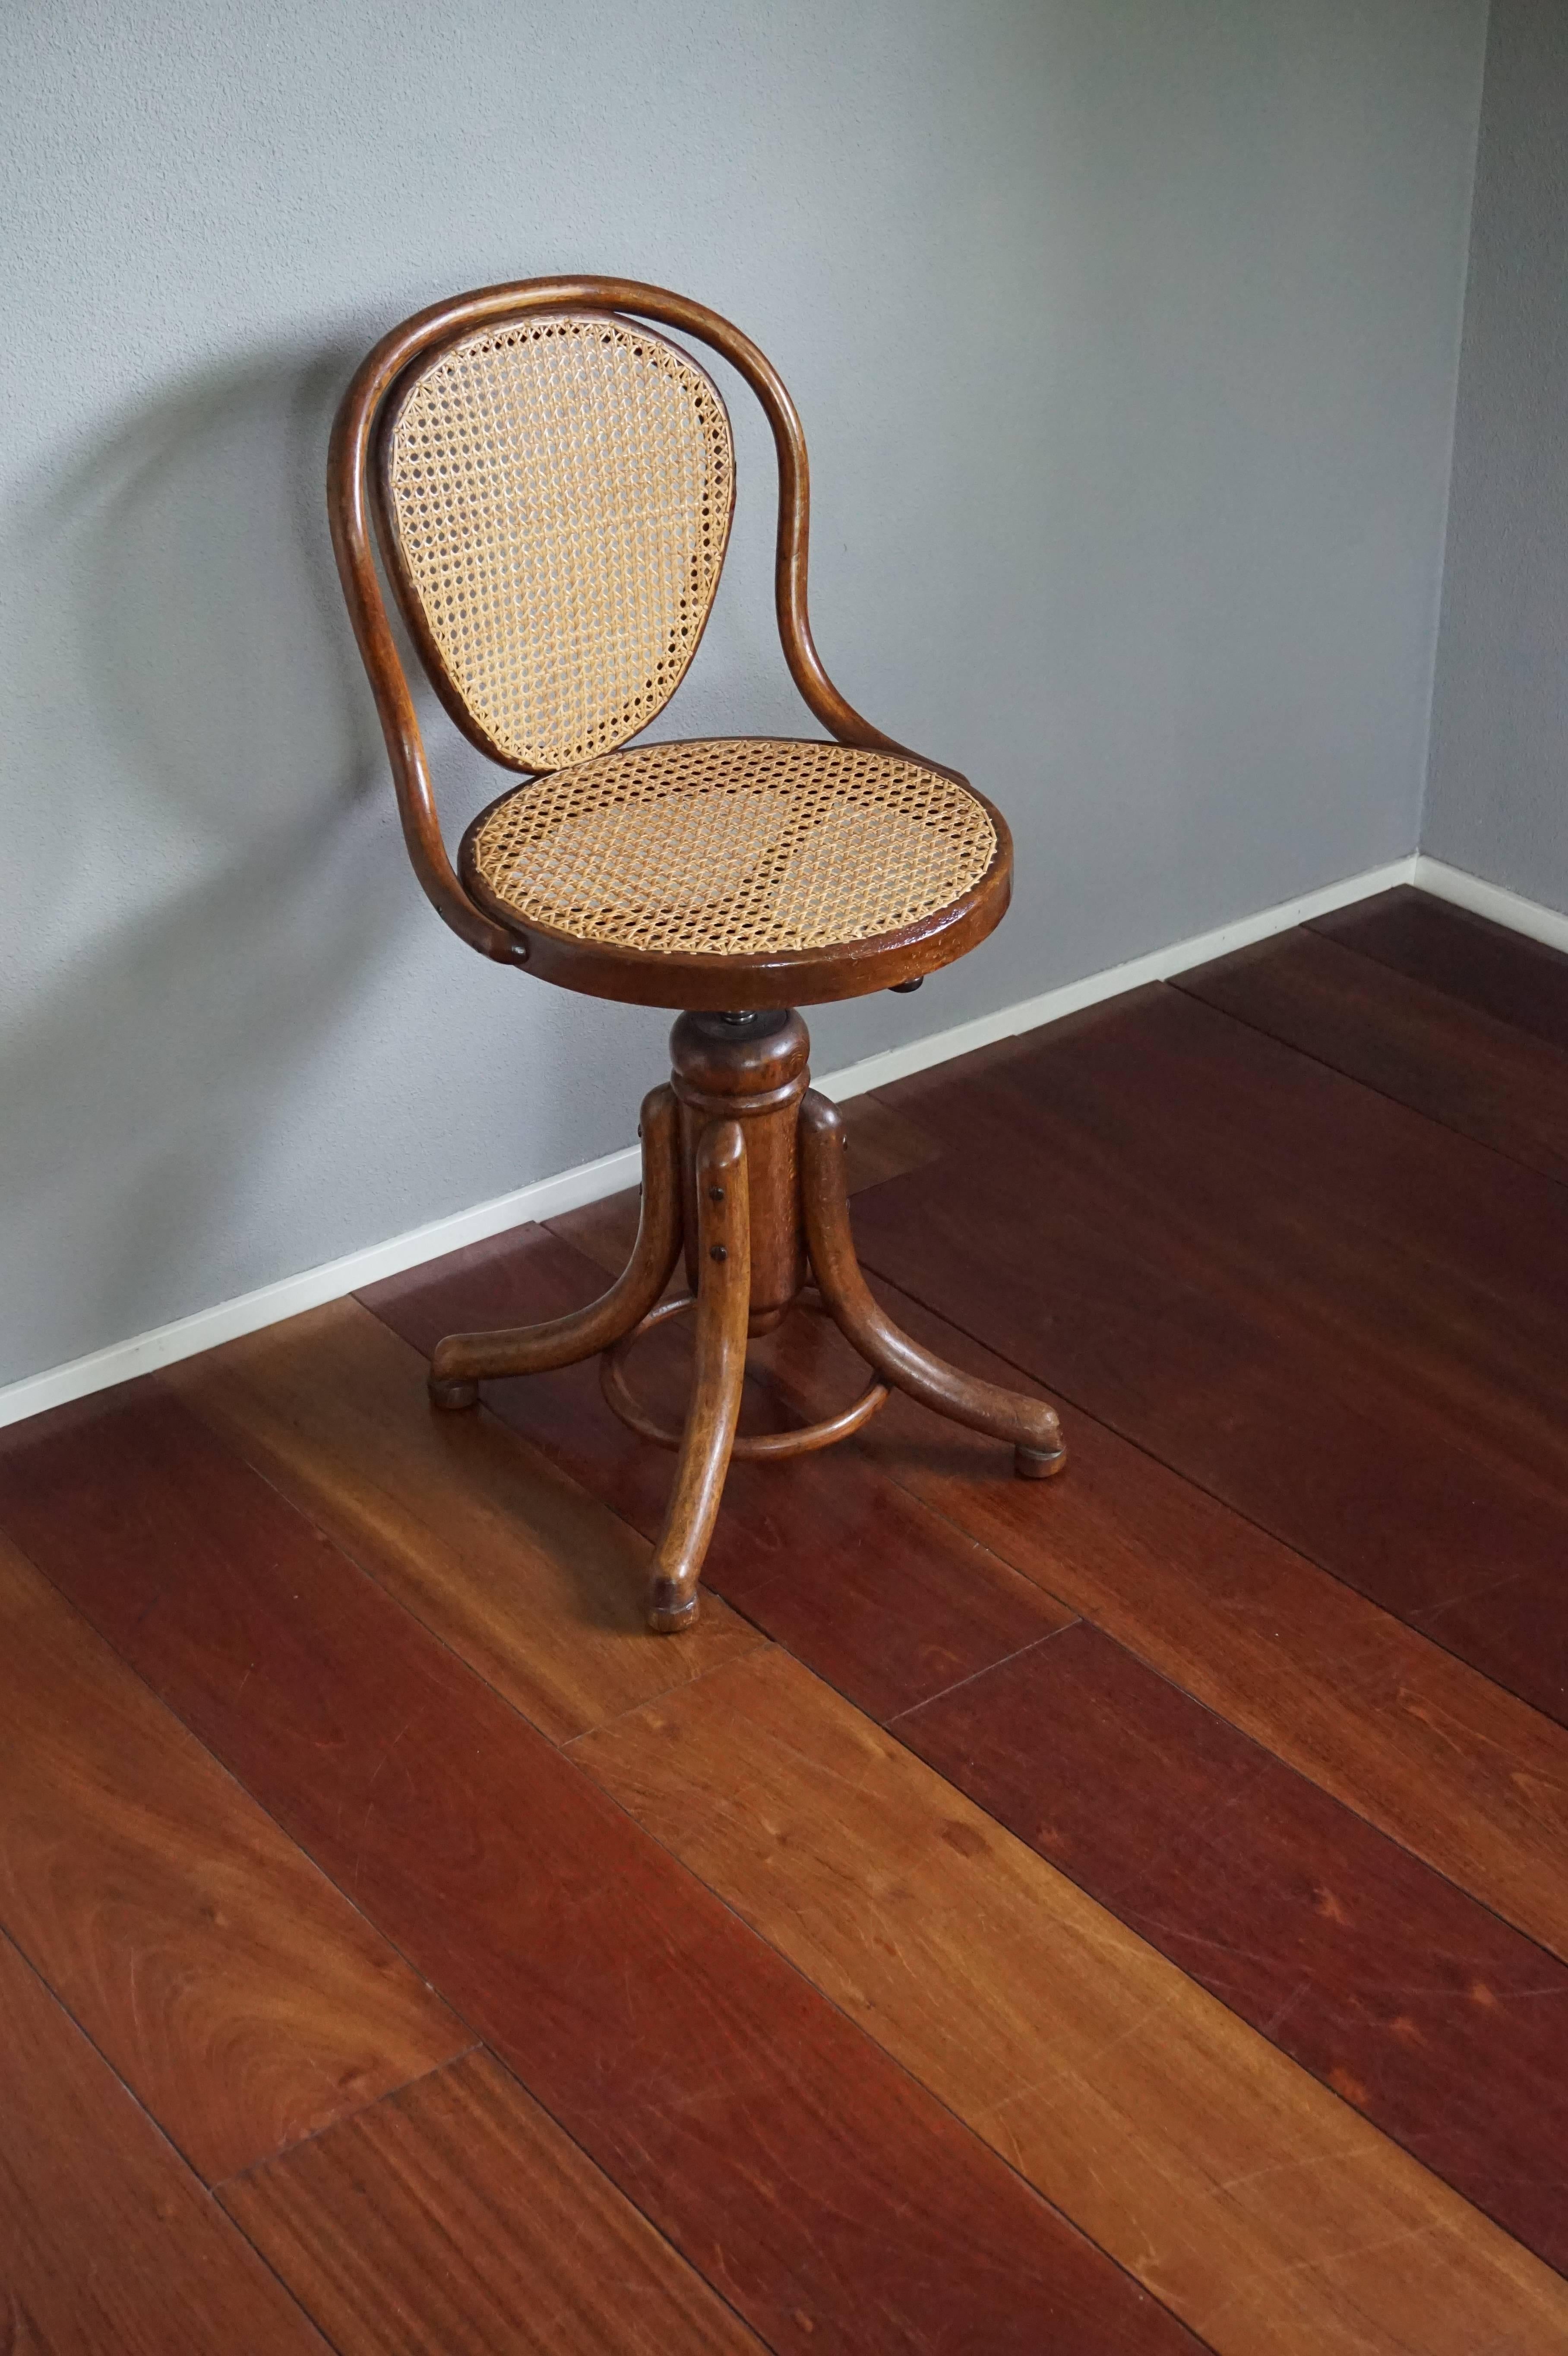 Rare antique ladies chair.

This fine, rare and elegant bentwood swivel chair from the Thonet brothers was hand-crafted in Austria and it is perfect for sitting behind an antique ladies desk or writing table. However, as a 'furniture still life' (as